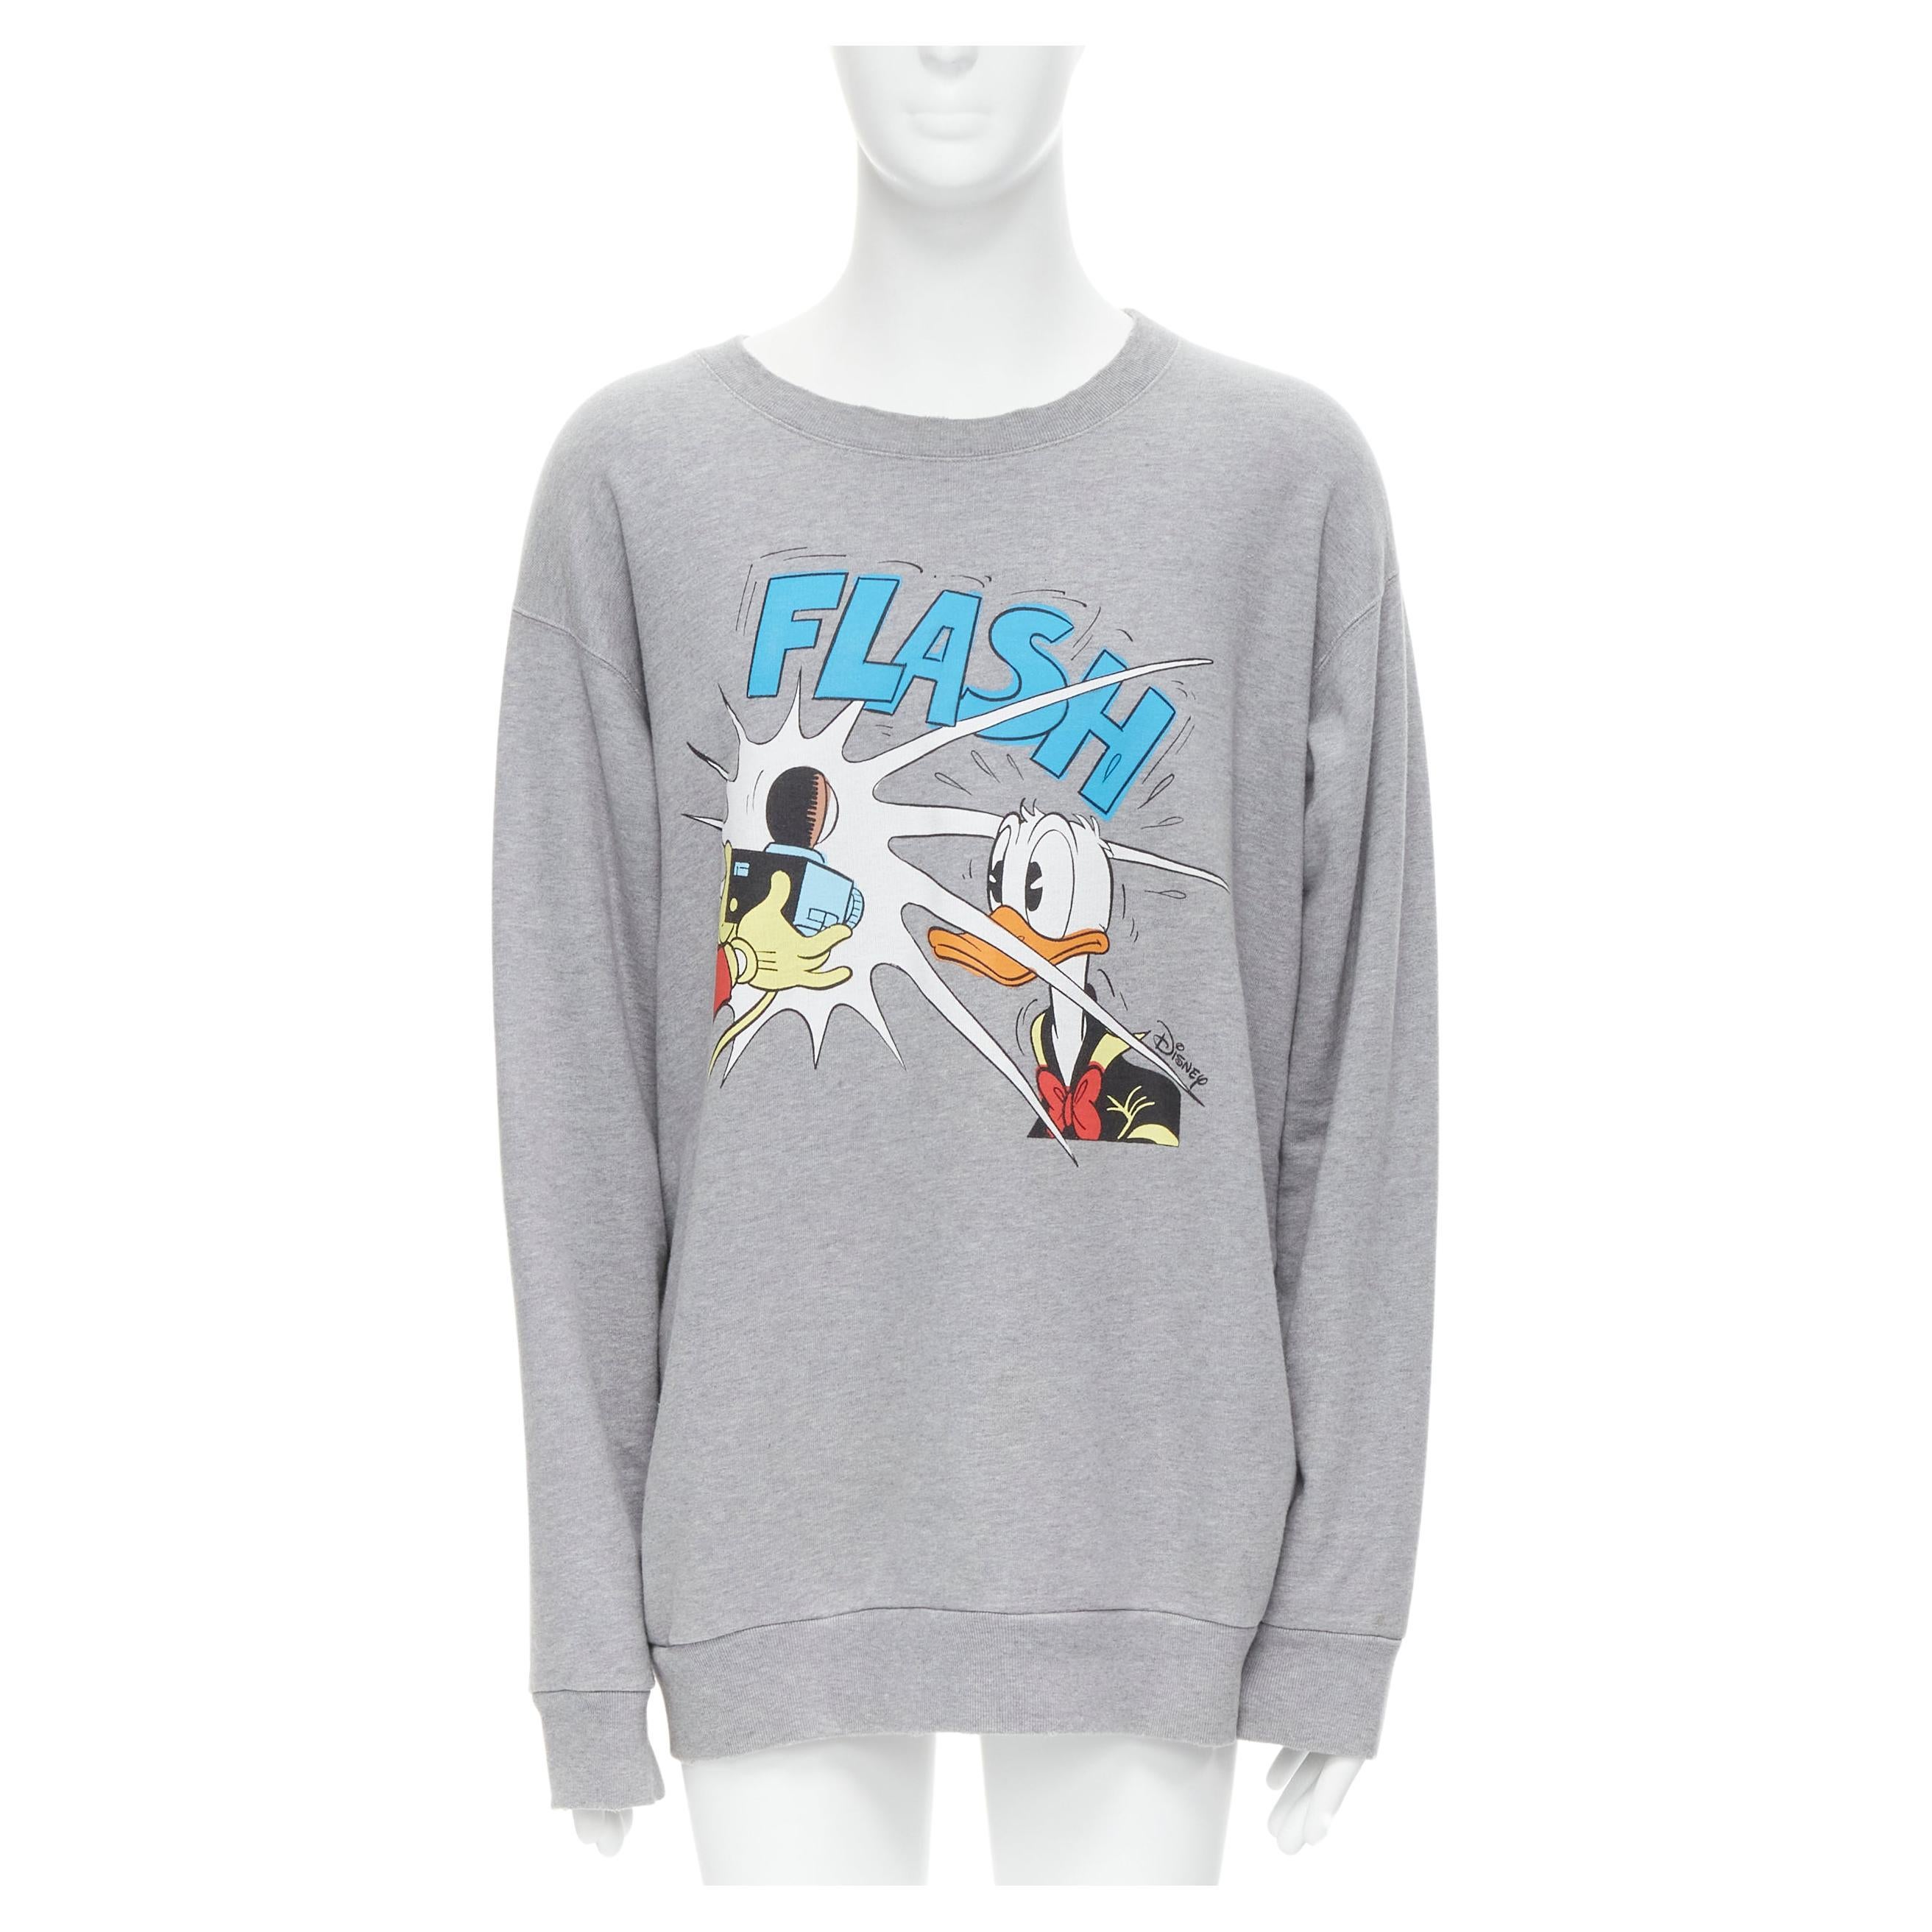 GUCCI DISNEY Donald Duck FLASH photography distressed oversized crew sweater L